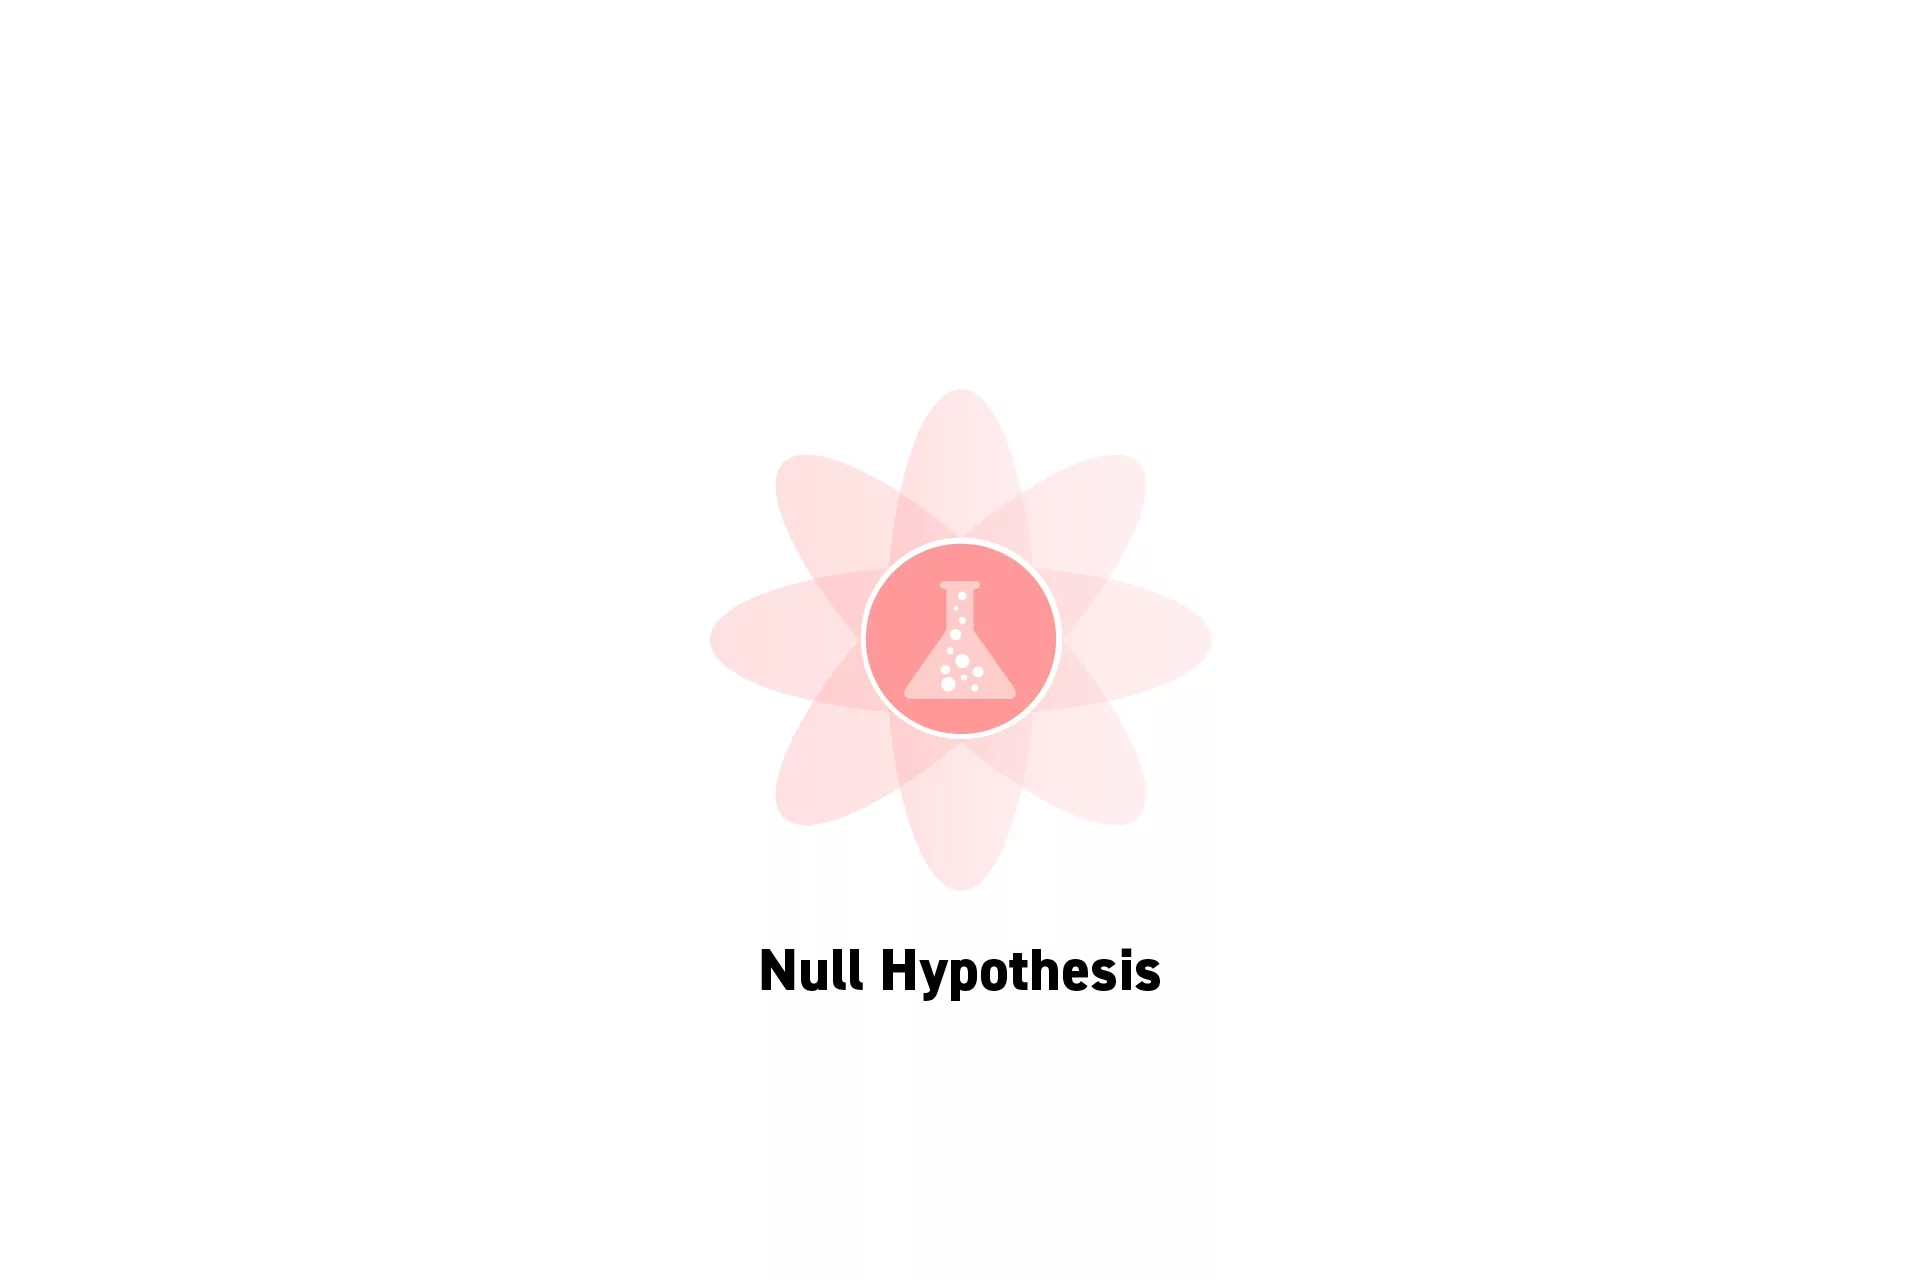 A flower that represents Strategy with the text “Null Hypothesis” beneath it.